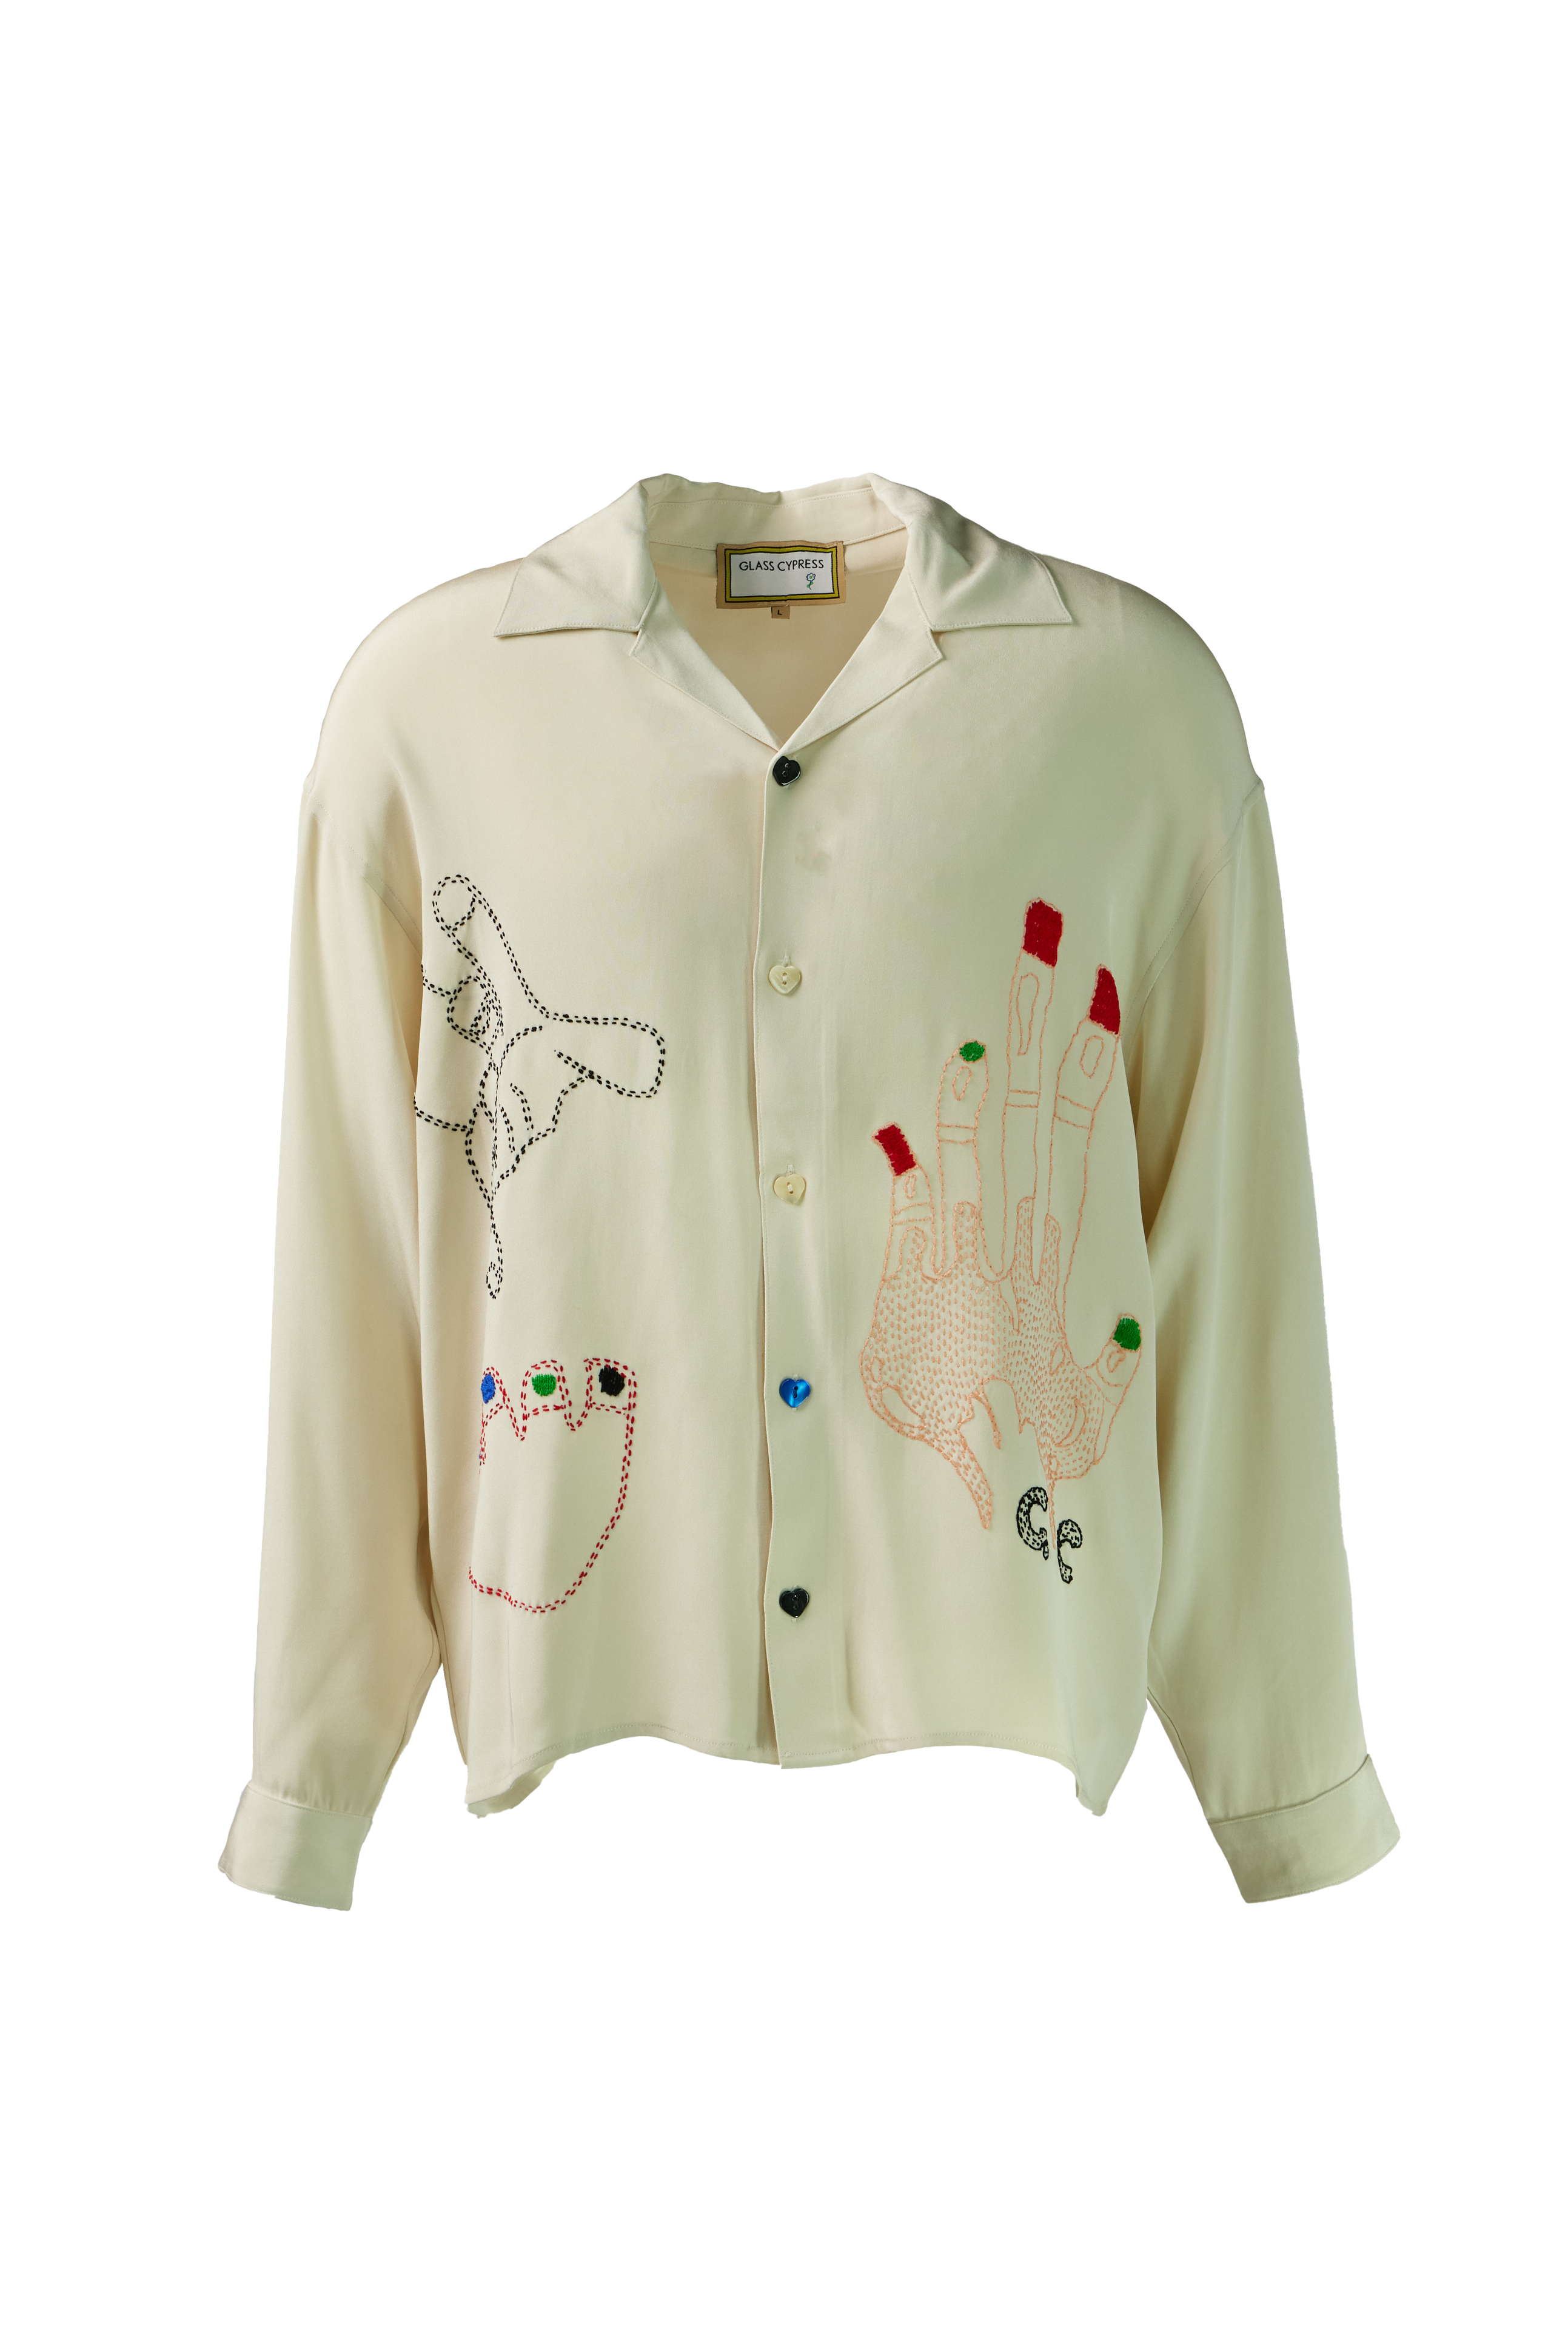 GLASS CYPRESS - Hands On Ivory Silk Shirt product image